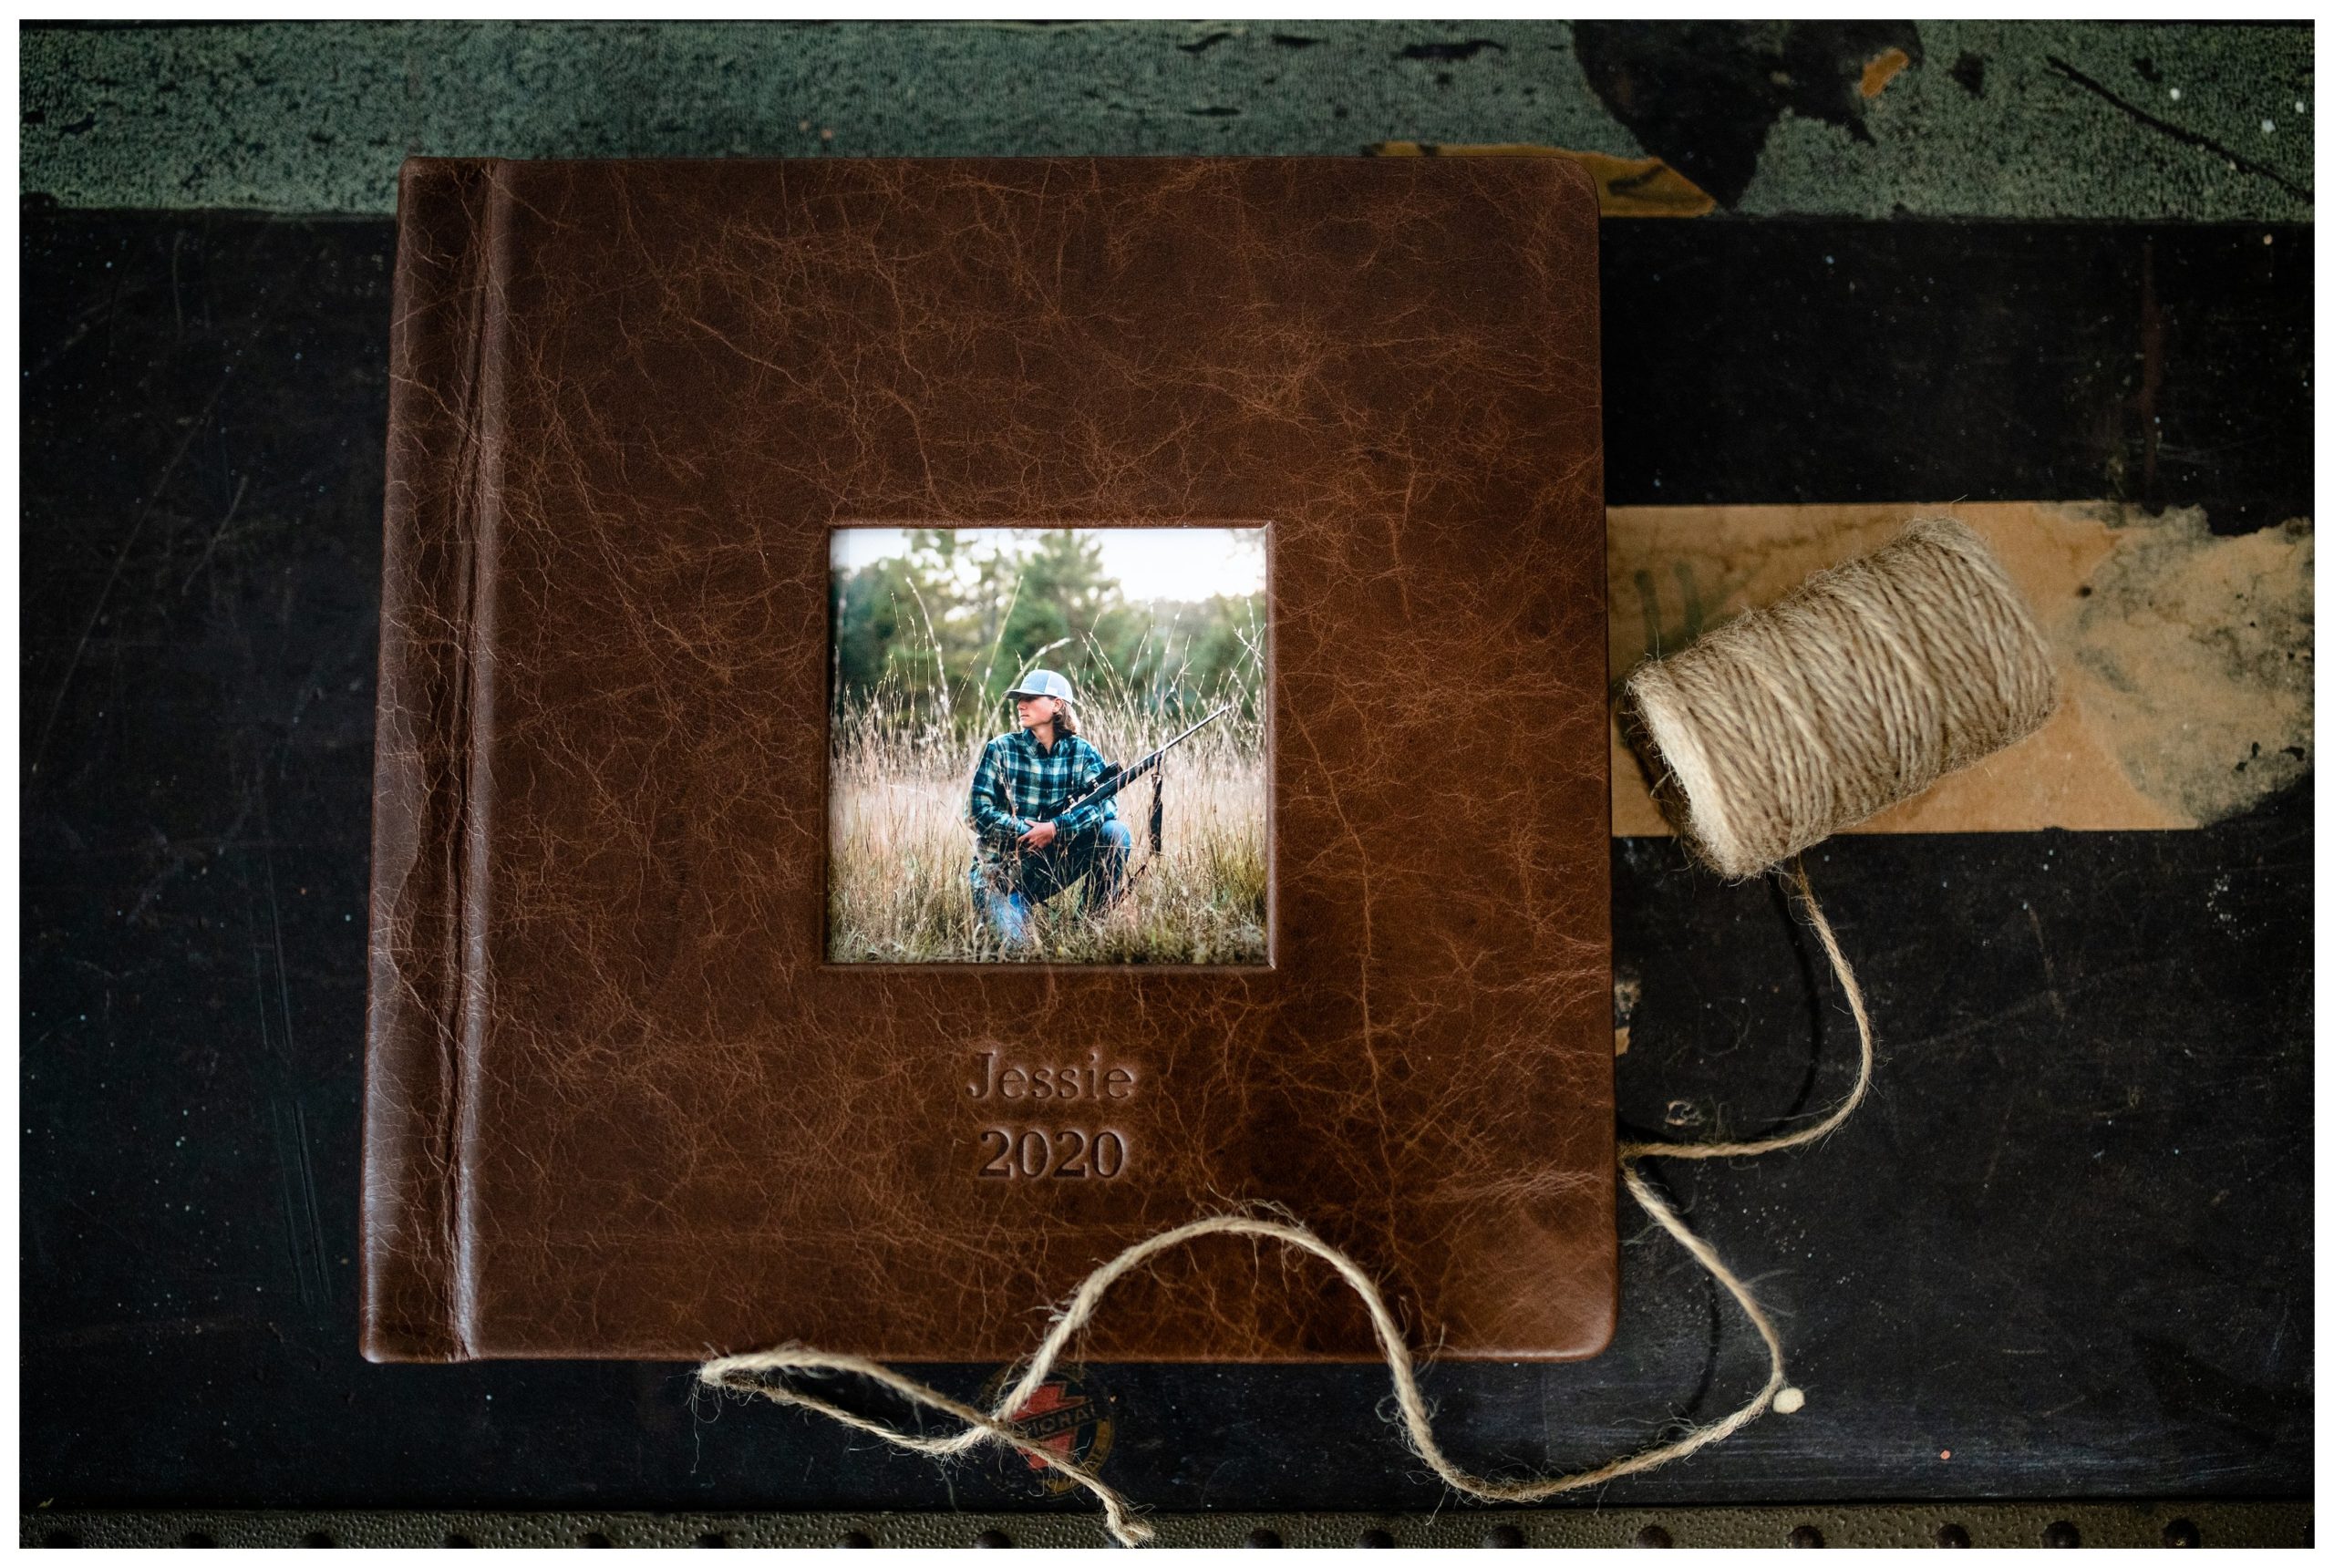 Professional photo album made with luxury distressed leather for a high school senior.